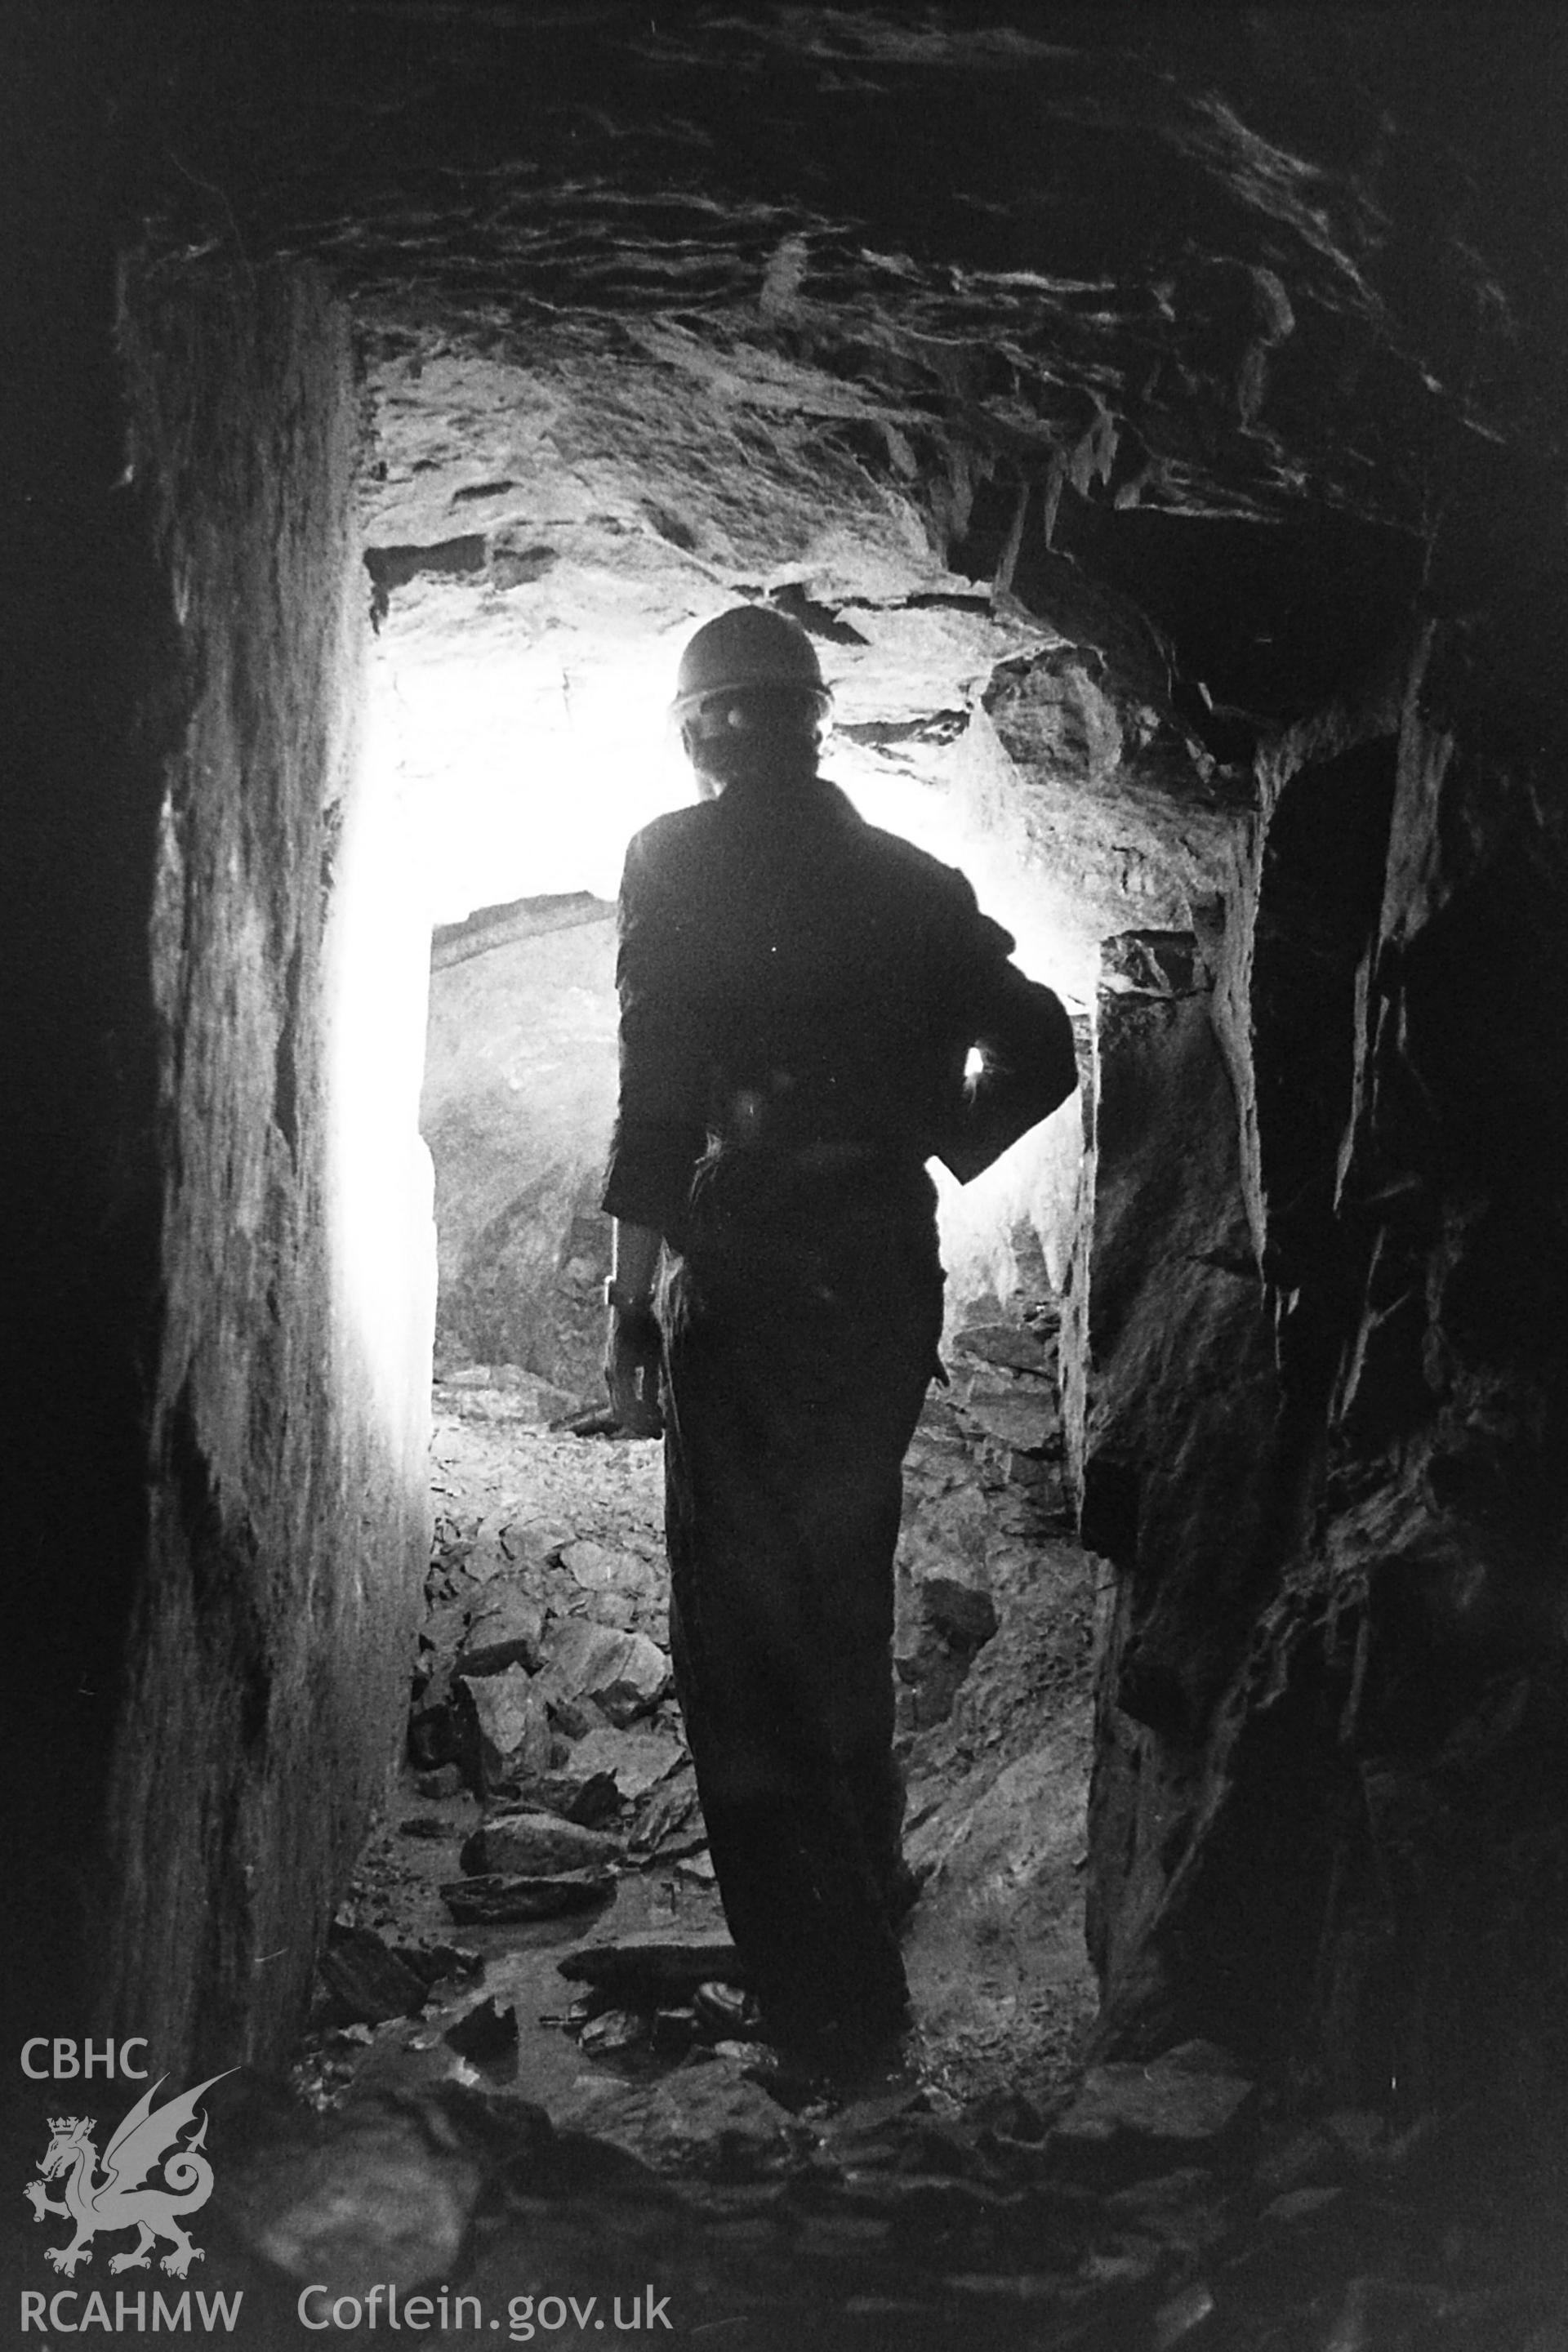 Black and white photo showing view of Llangunnor Lead Mines, taken by Paul R. Davis, 1984.